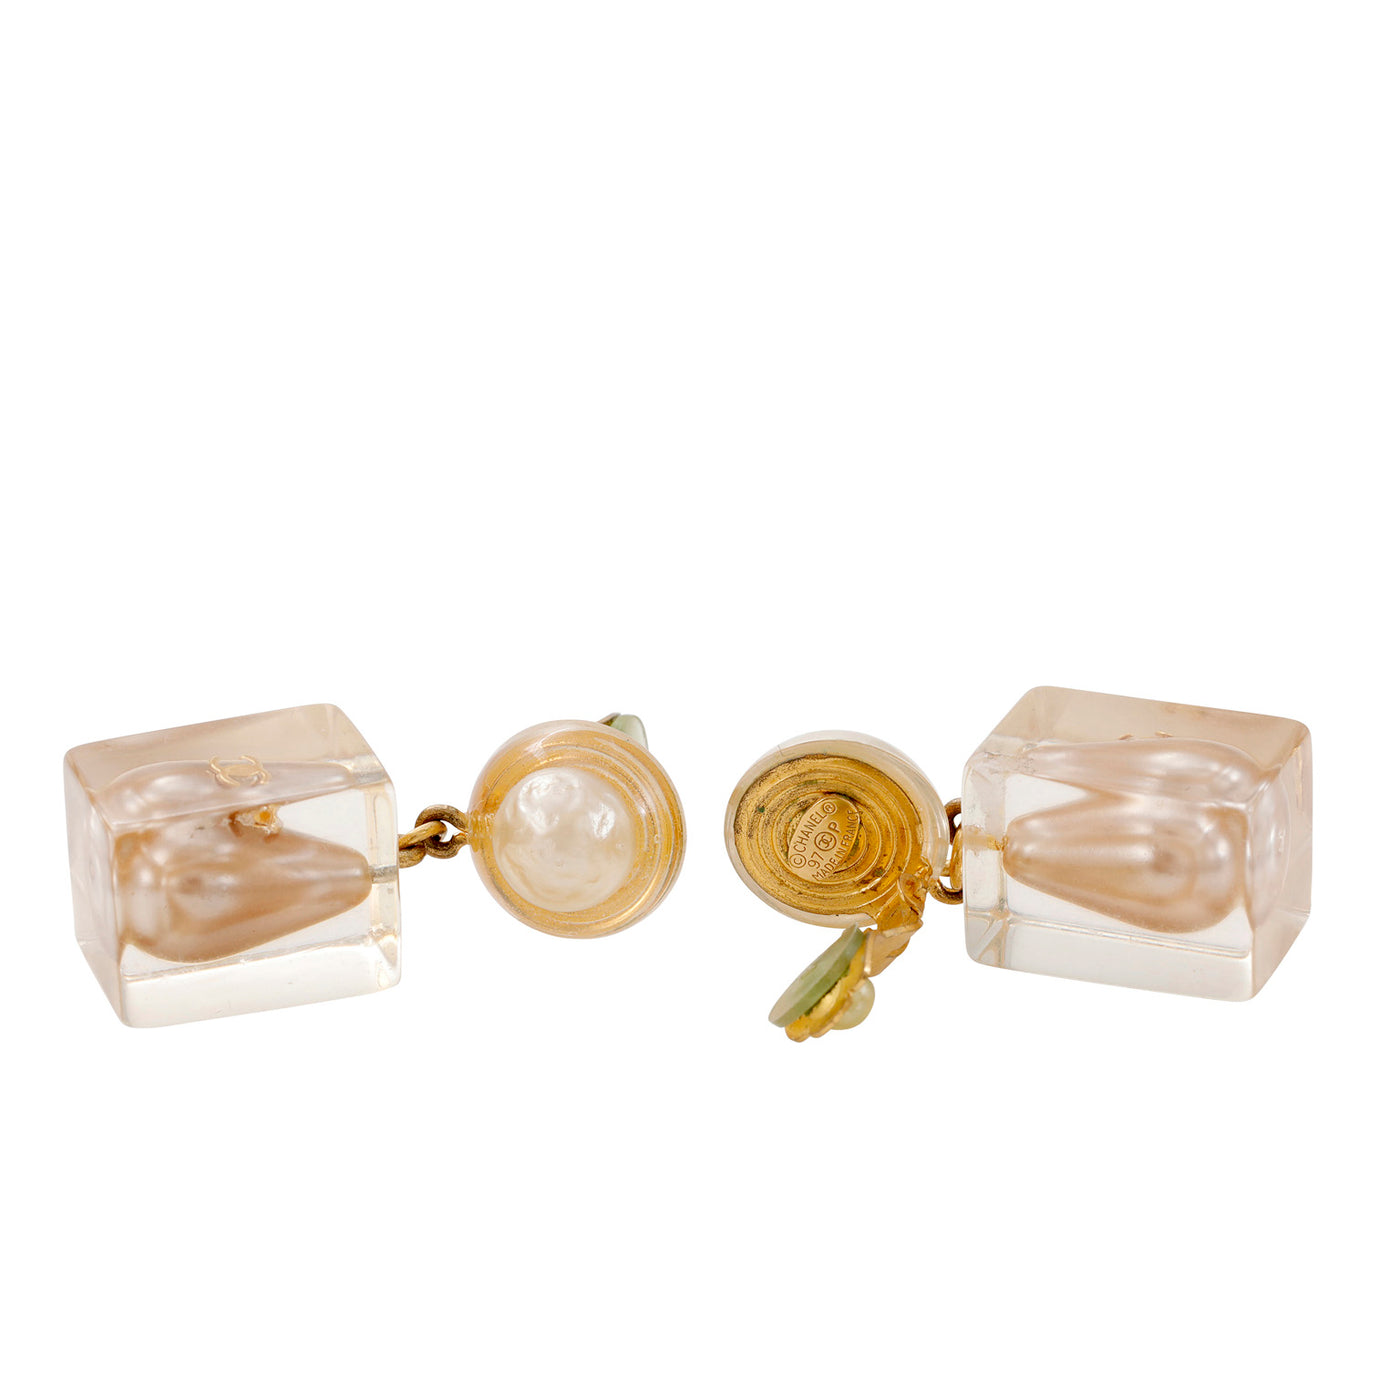 Chanel Clear Resin Large Pearl Drop CC Earrings